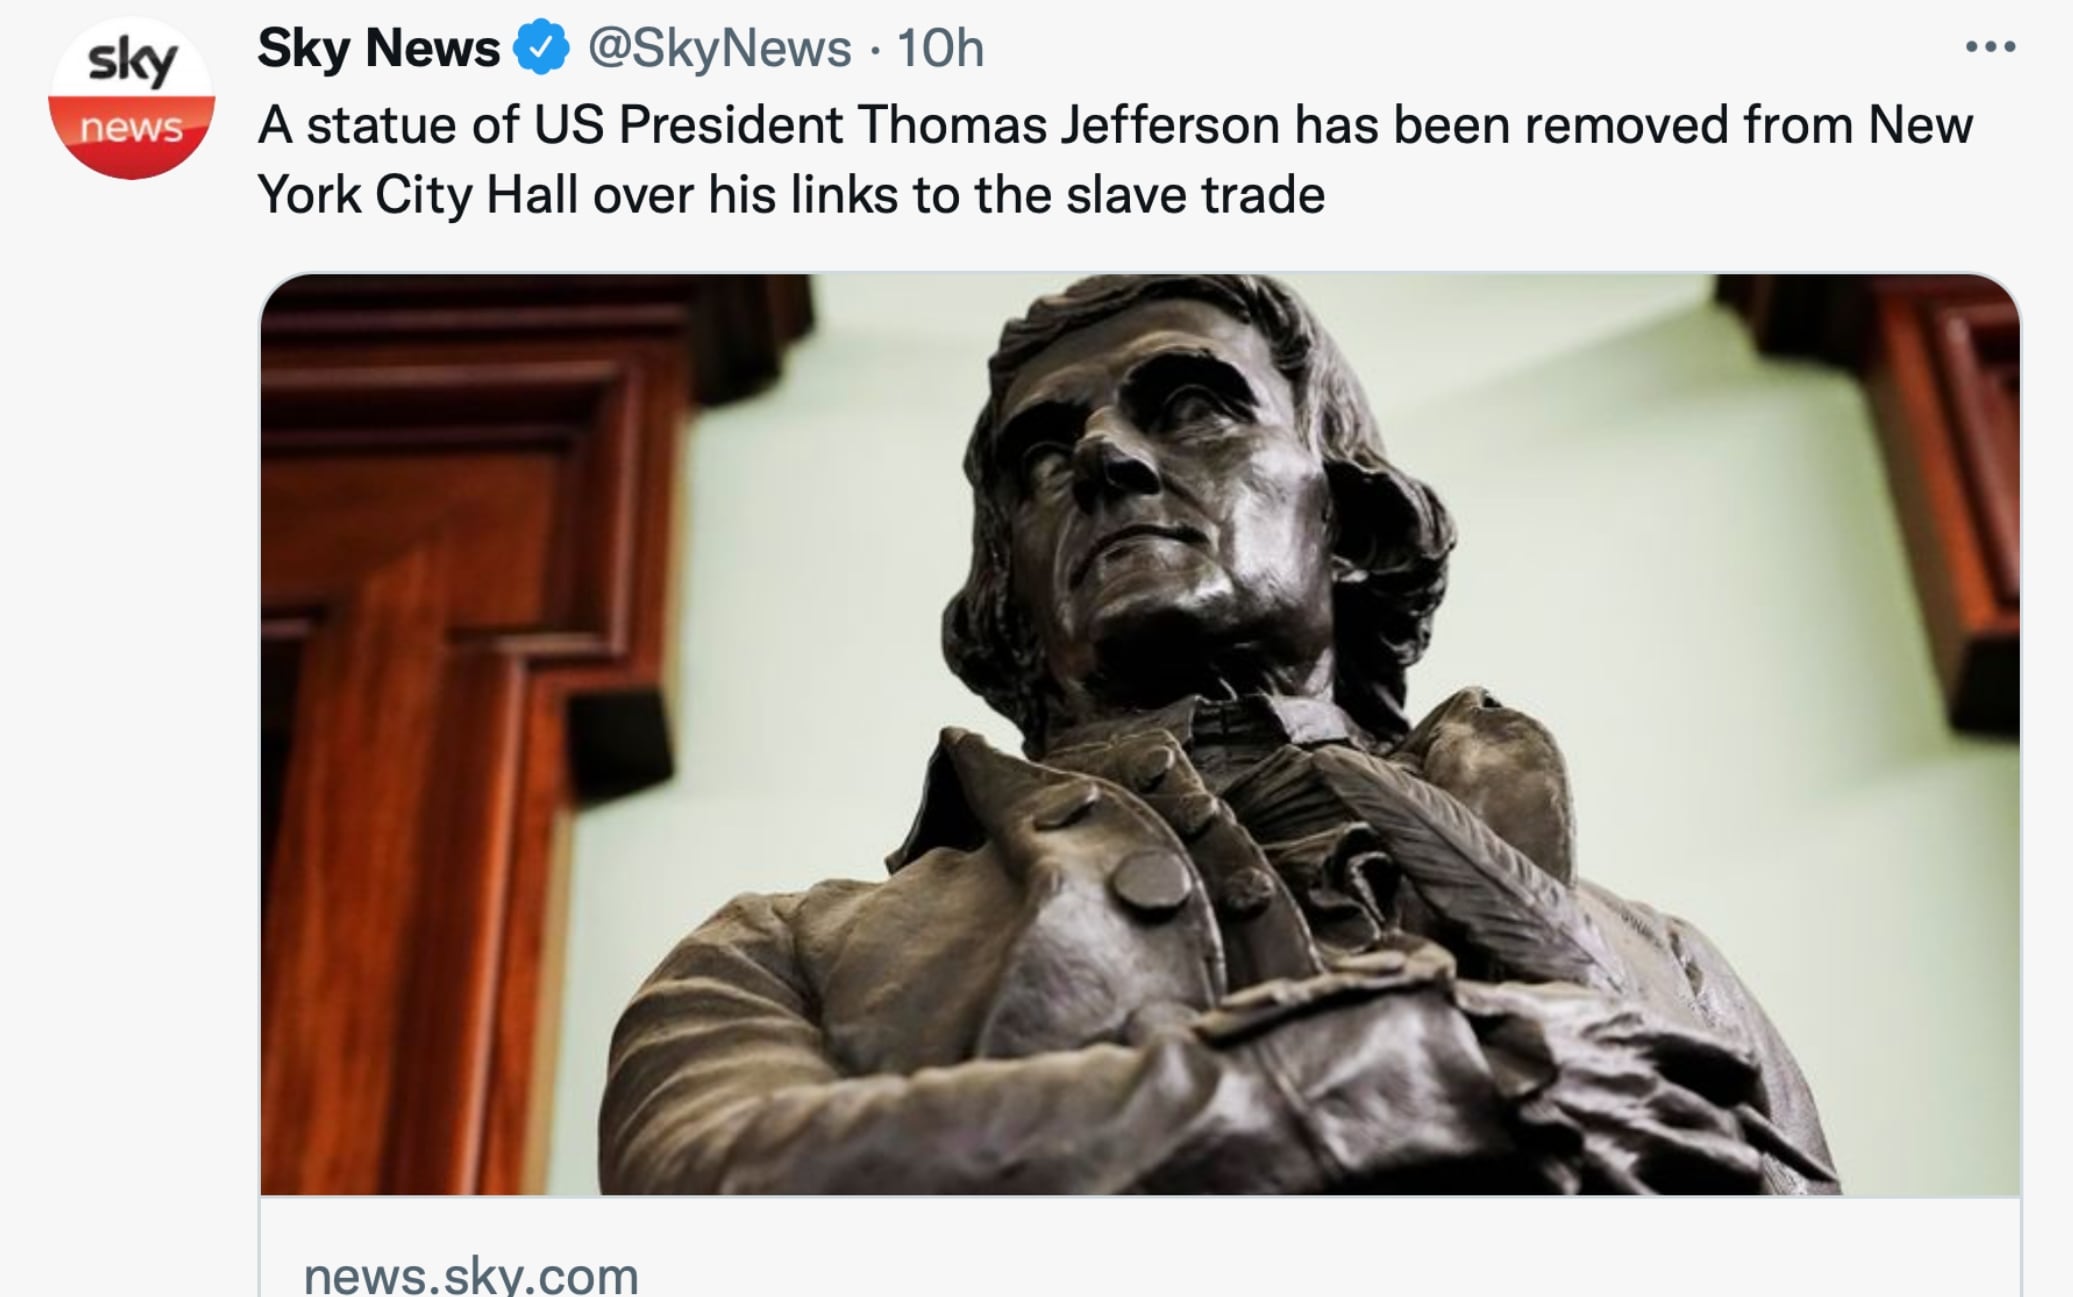 USA, Thomas Jefferson statue removed from New York City Hall